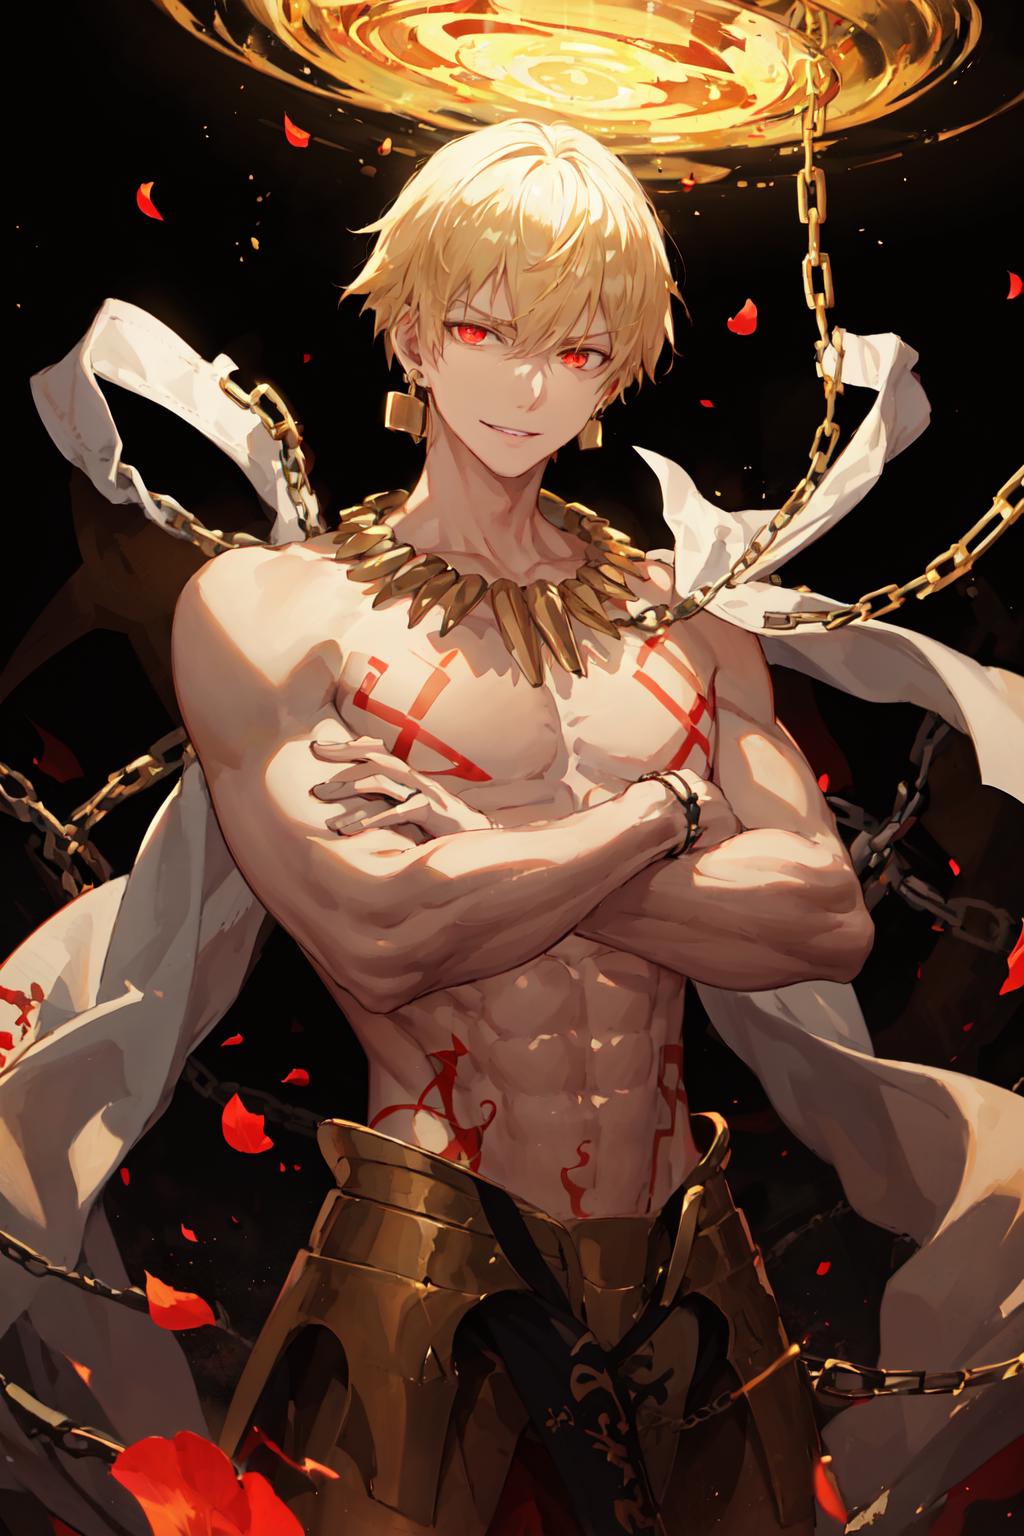 Gilgamesh - The King of Heroes | Fate | FGO image by Cooler_Rider